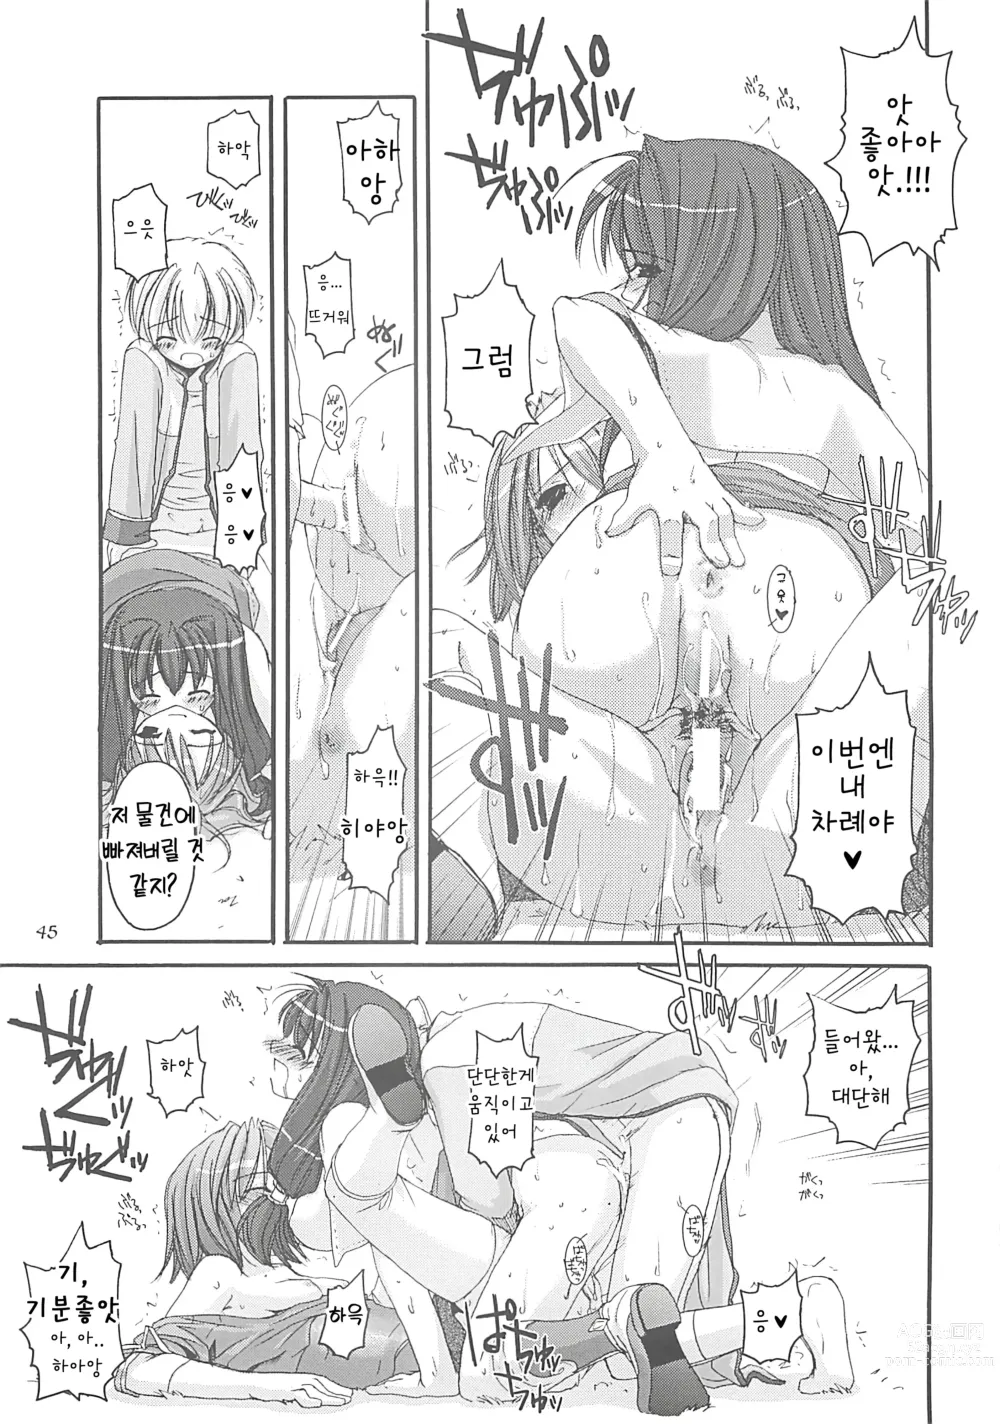 Page 44 of doujinshi D.L. Action 13